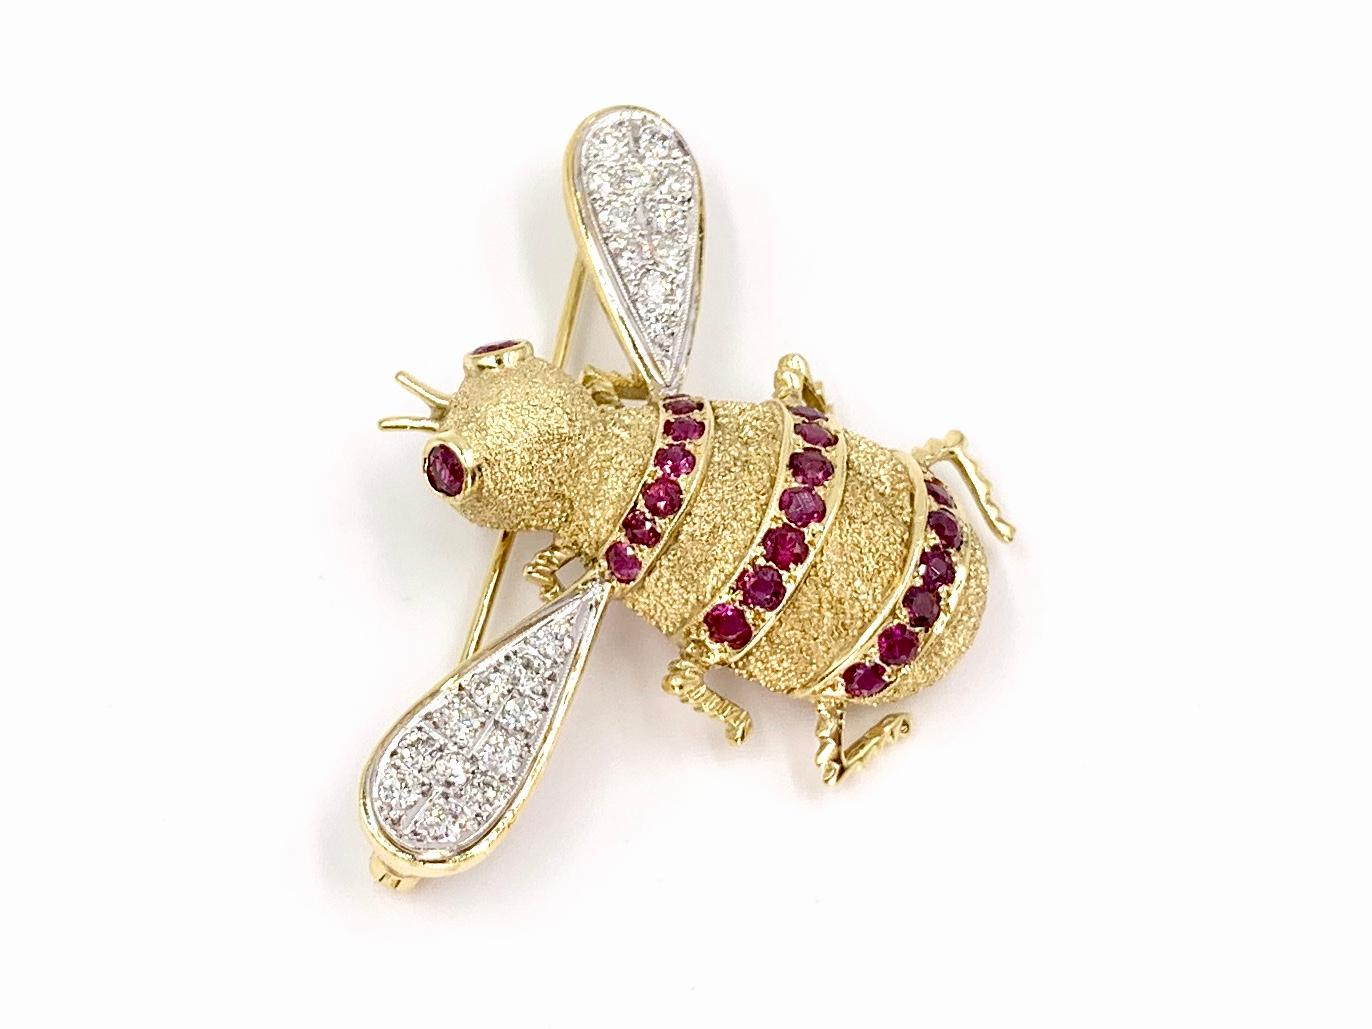 Adorable and well crafted 18 karat yellow and white gold detailed bee brooch featuring white diamonds and vivid rubies. 22 round diamonds at .59 carats total weight are set in white gold. 23 rich rubies at 1.30 carats total weight are set as the bee